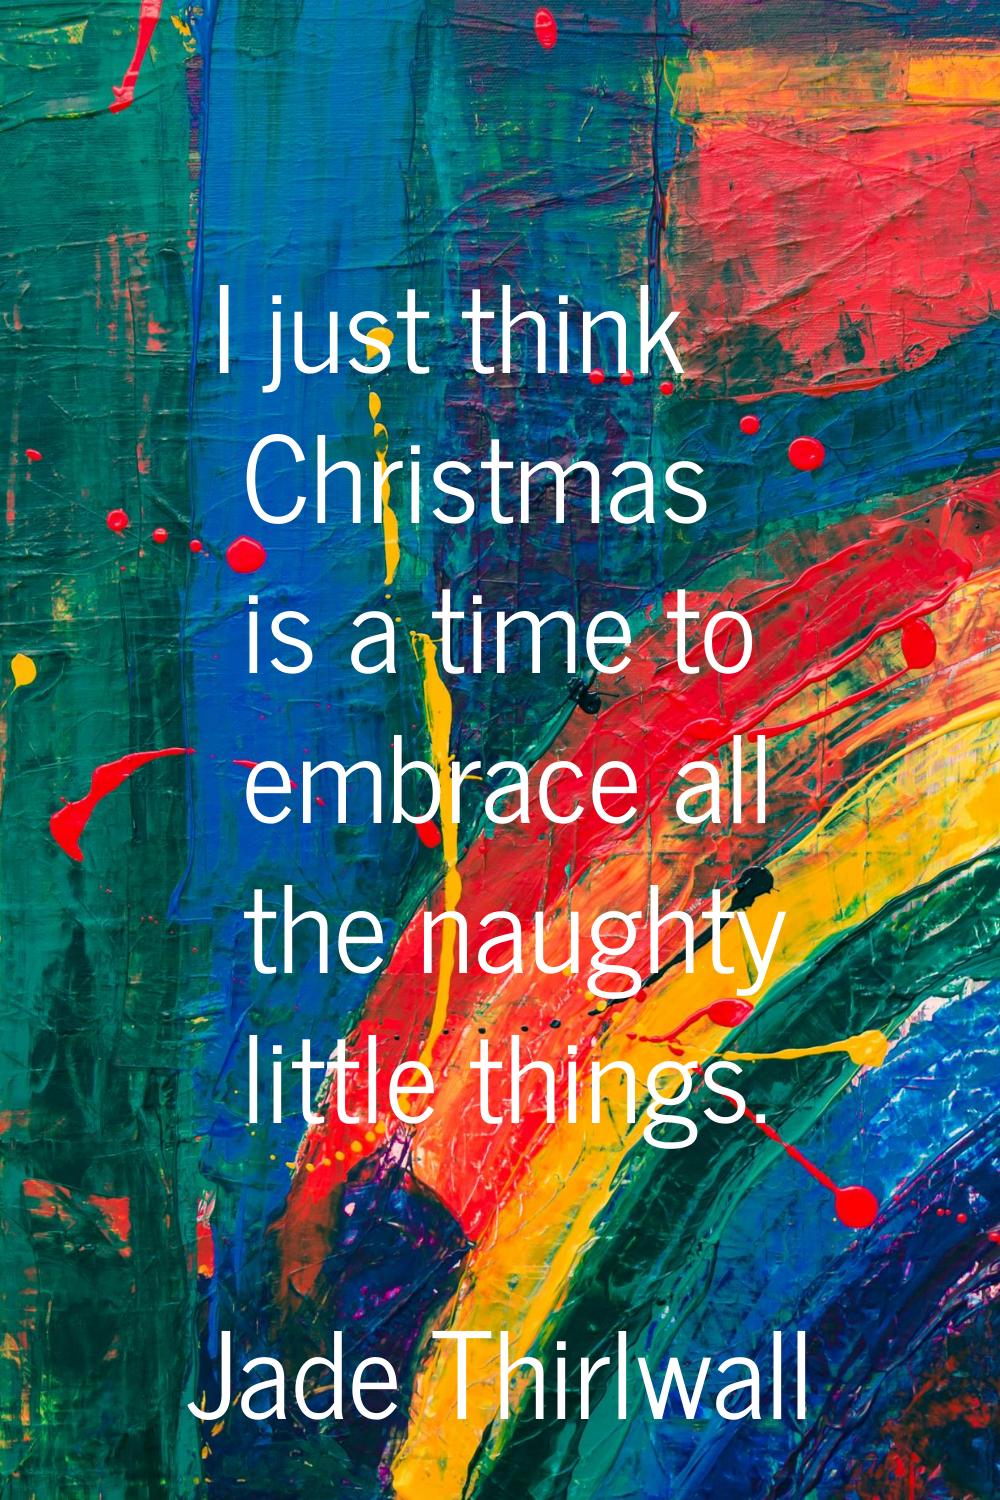 I just think Christmas is a time to embrace all the naughty little things.